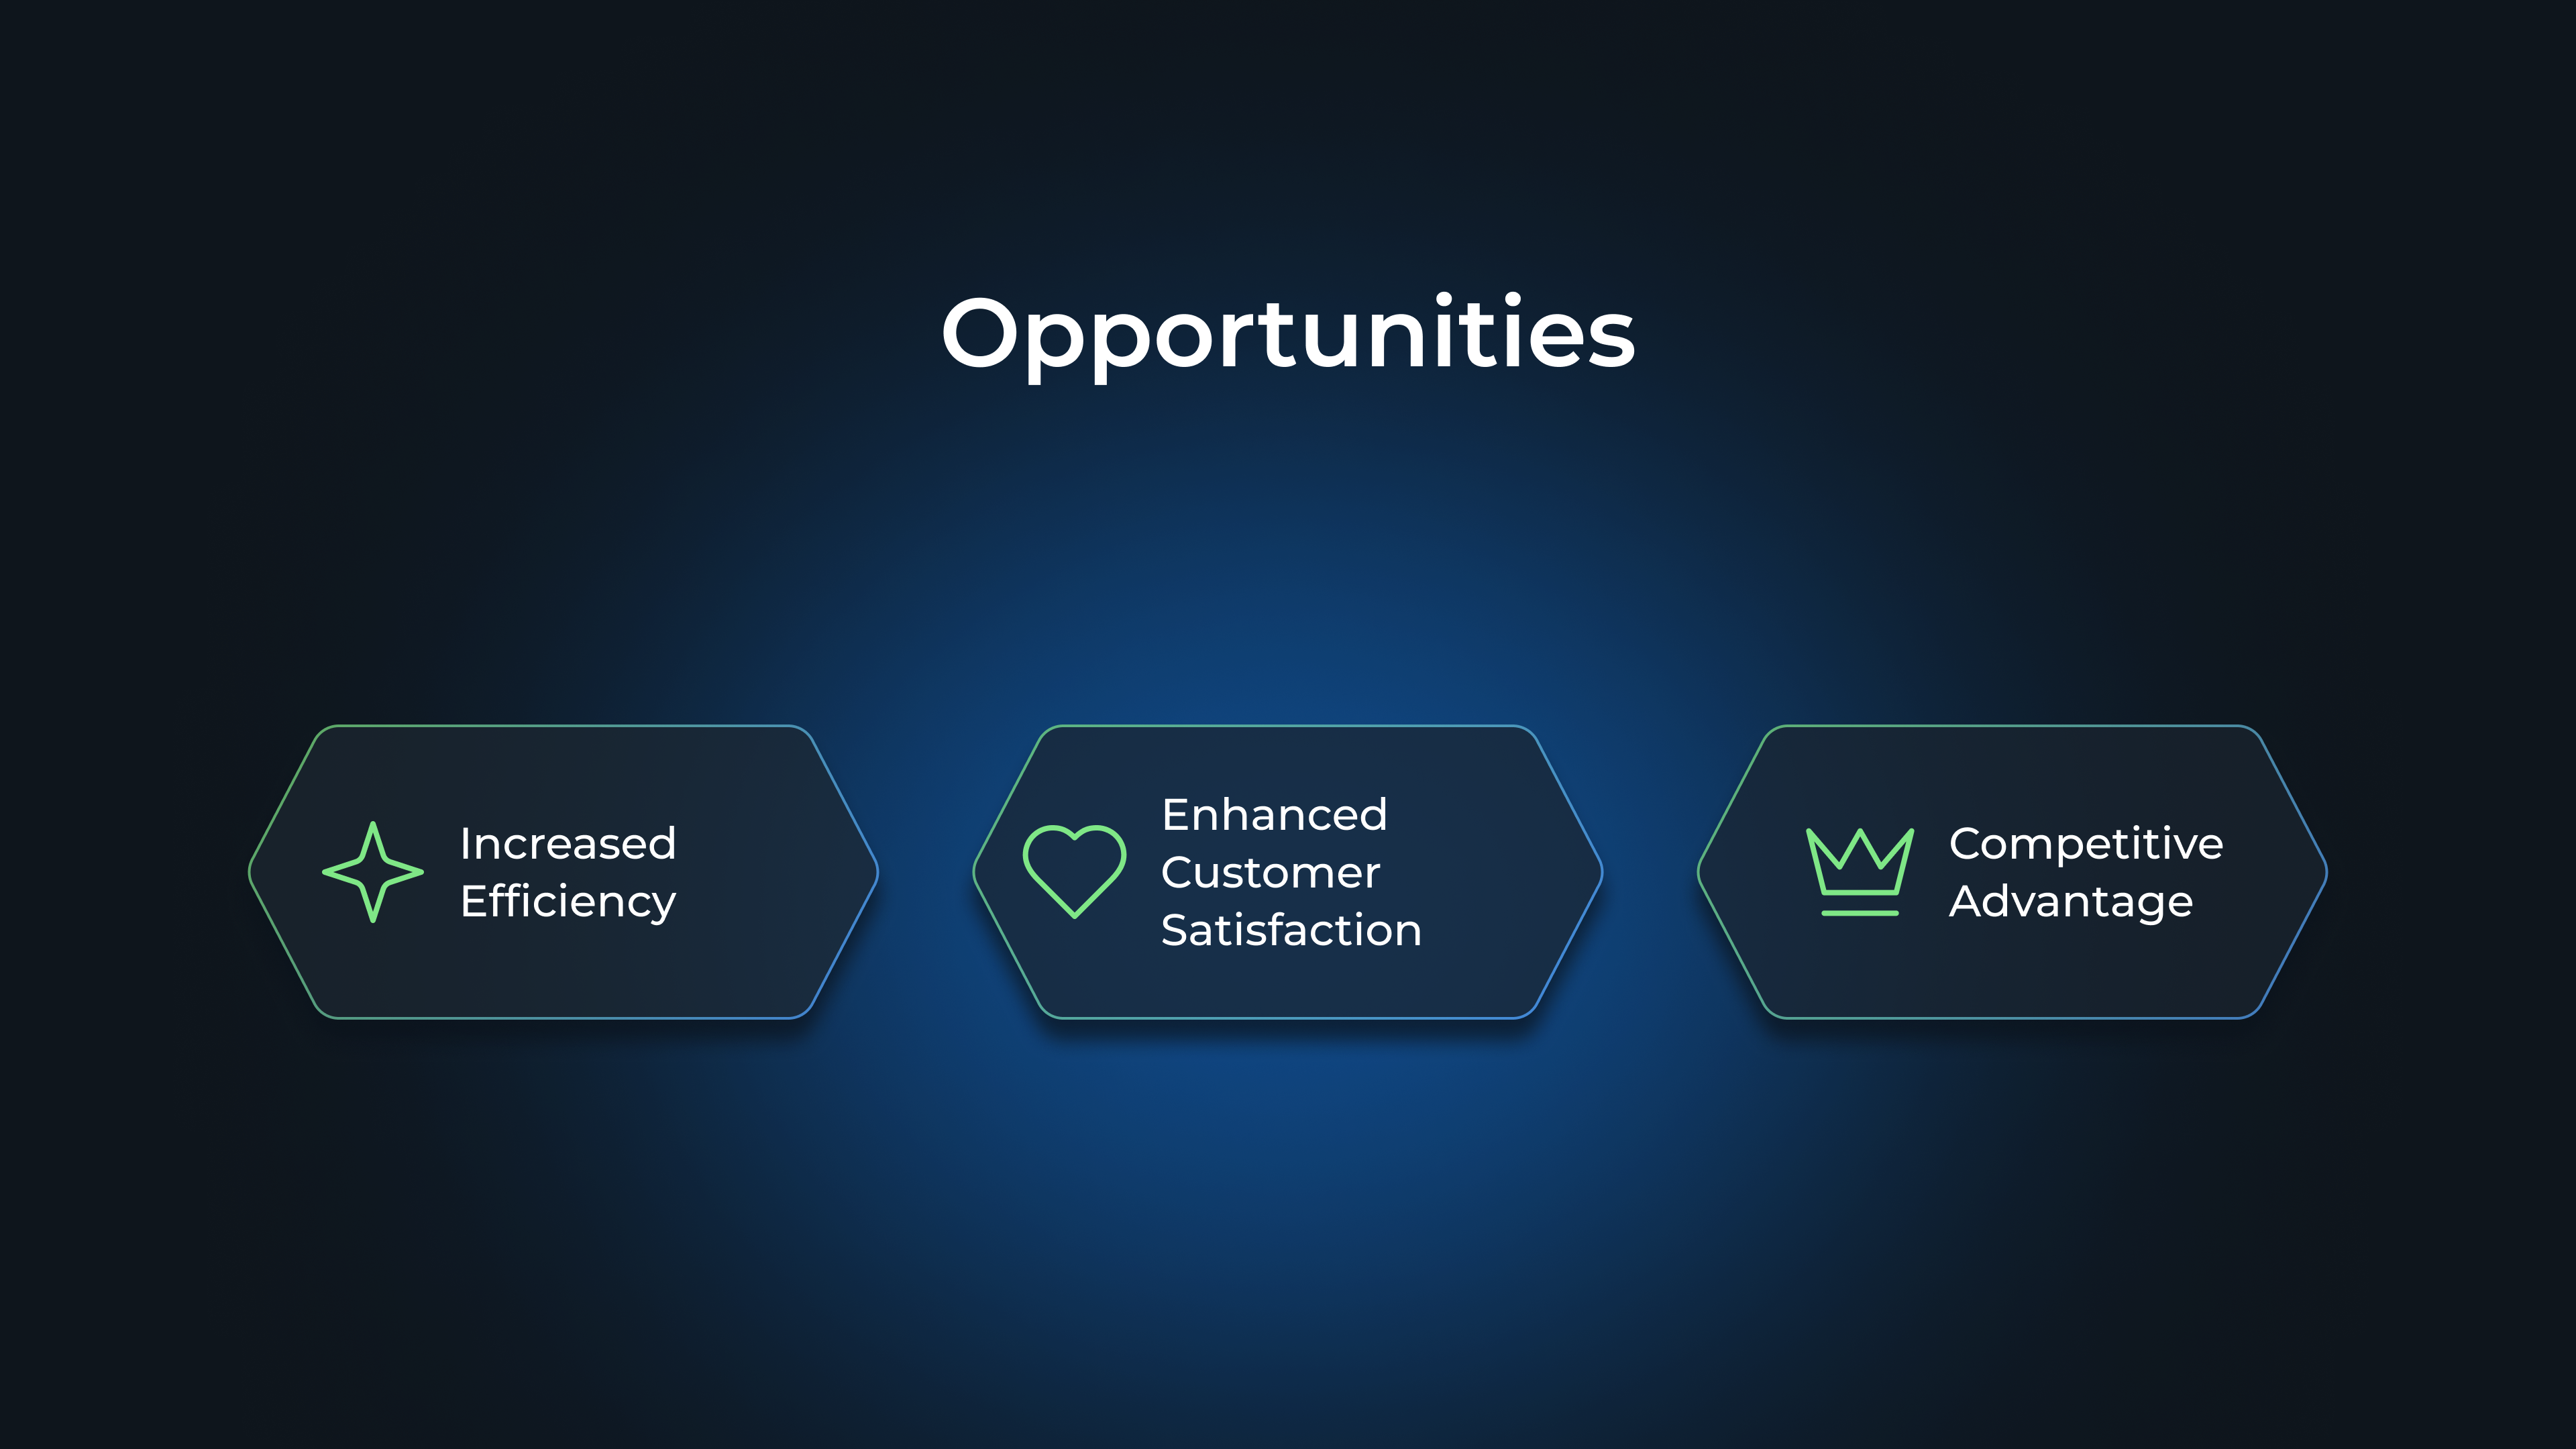 Opportunities: Increased Efficiency, Enhanced Customer Satisfaction, Competitive Advantage
